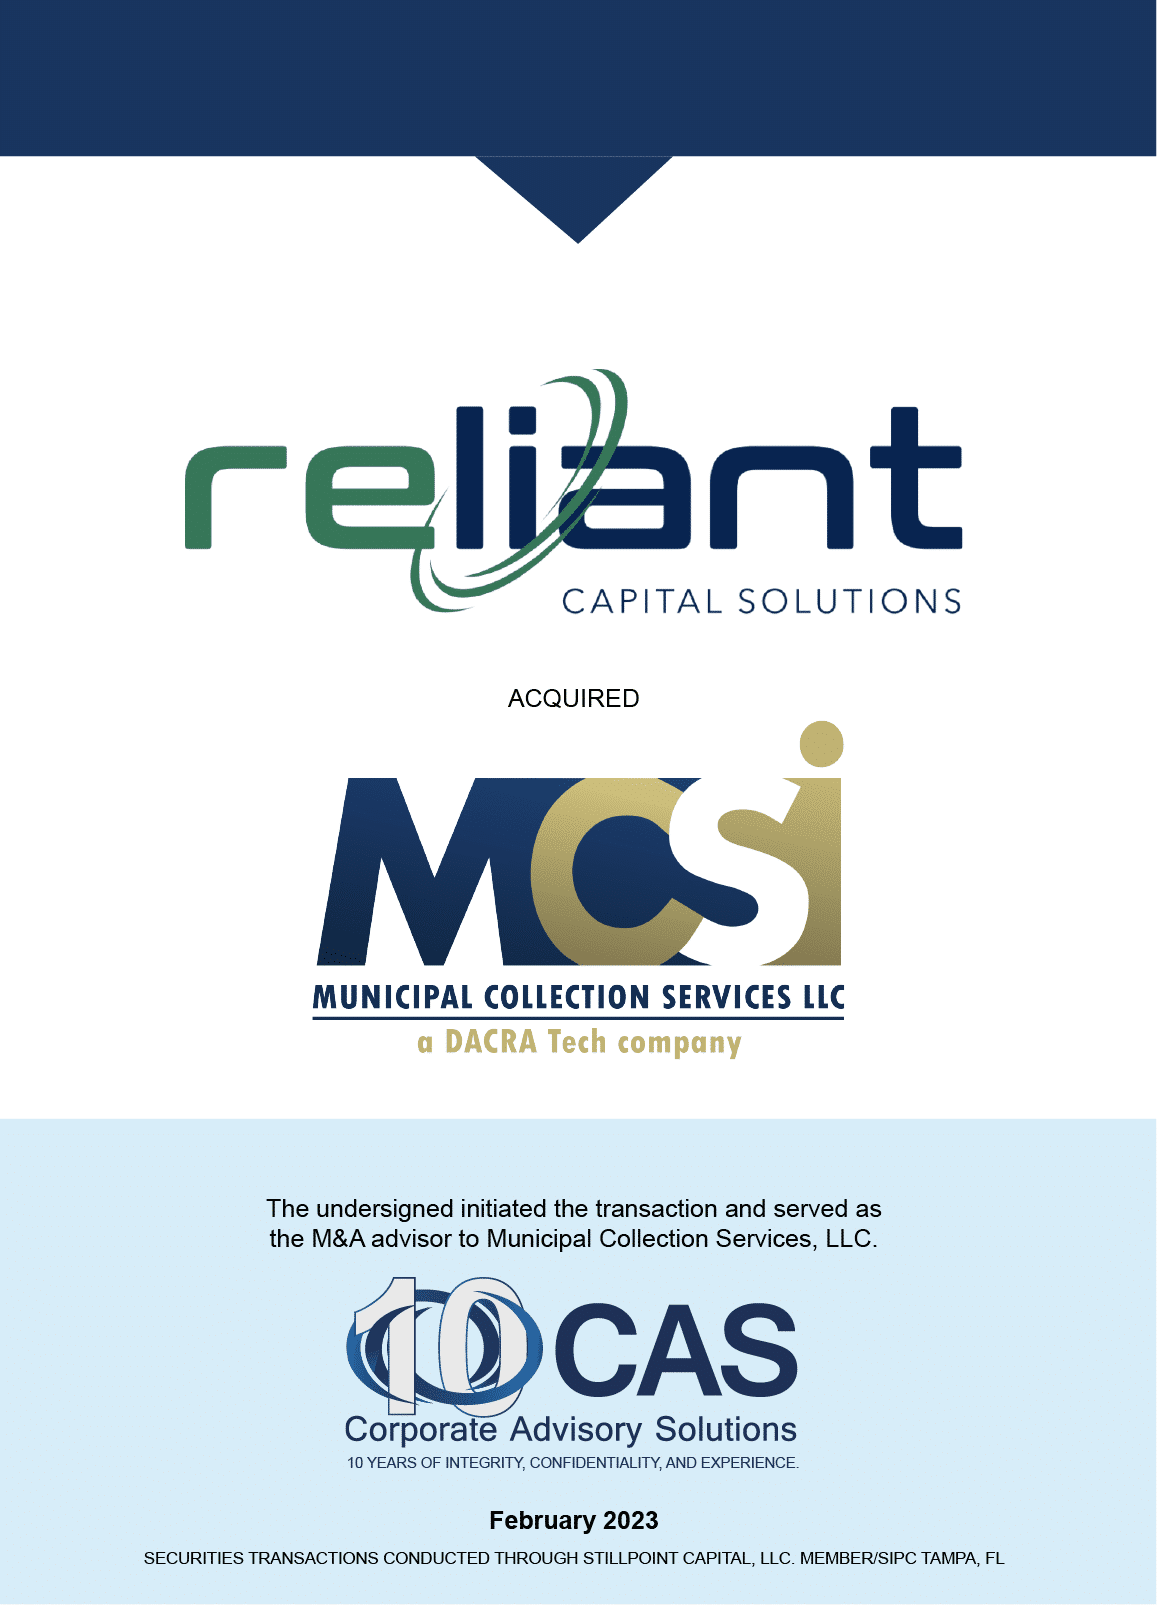 reliant capital solutions acquires Municipal Collection Services, inc